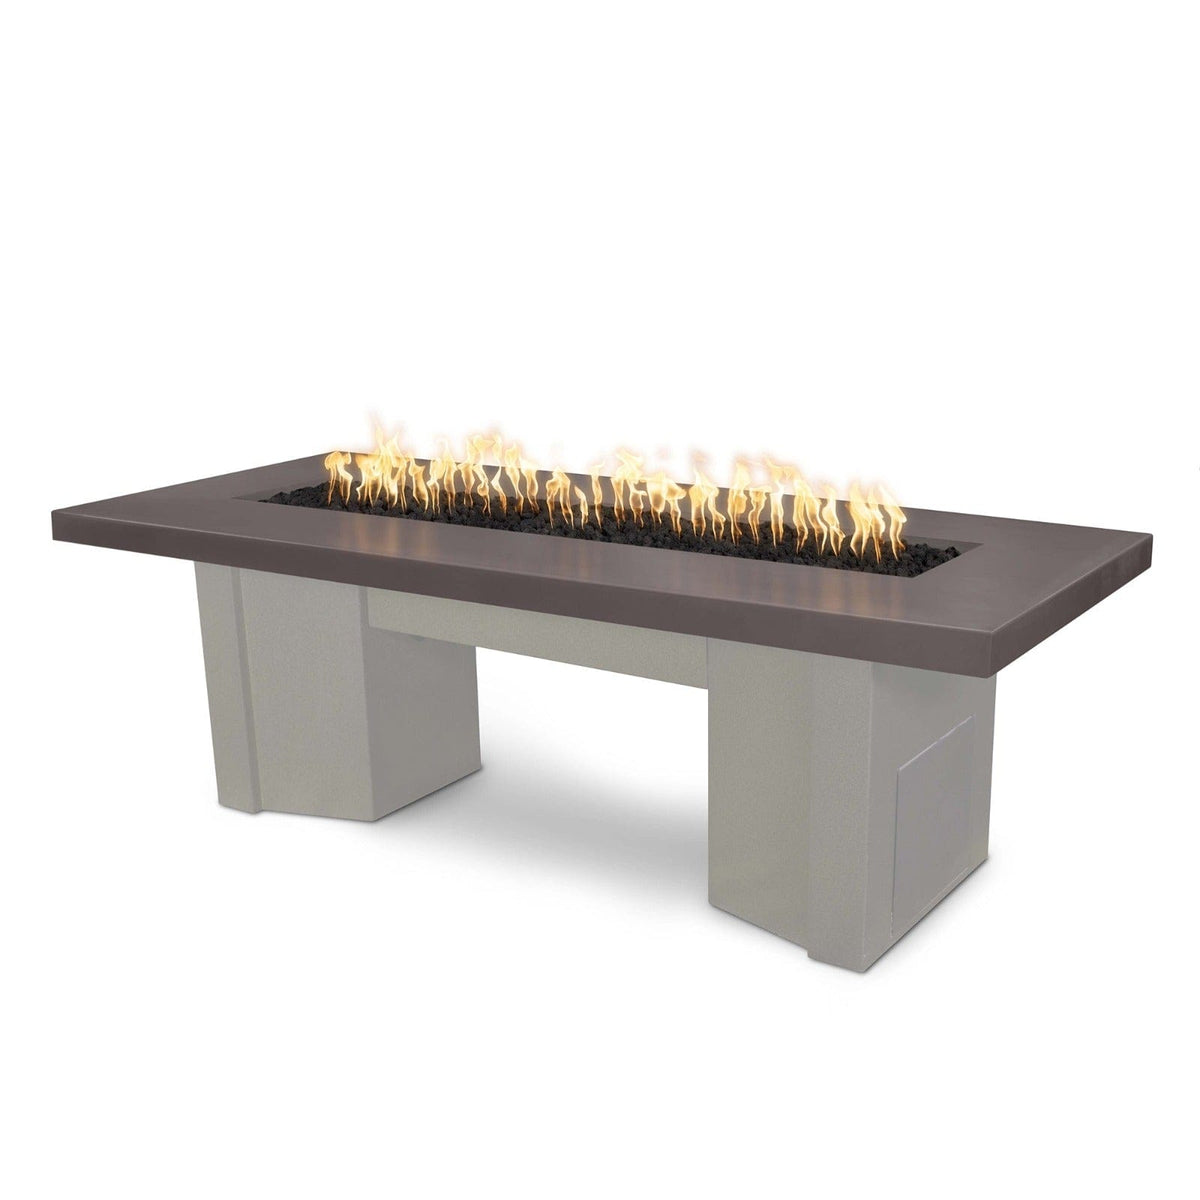 The Outdoor Plus Fire Features Chestnut (-CST) / Pewter Powder Coated Steel (-PEW) The Outdoor Plus 78&quot; Alameda Fire Table Smooth Concrete in Liquid Propane - Match Lit with Flame Sense System / OPT-ALMGFRC78FSML-LP